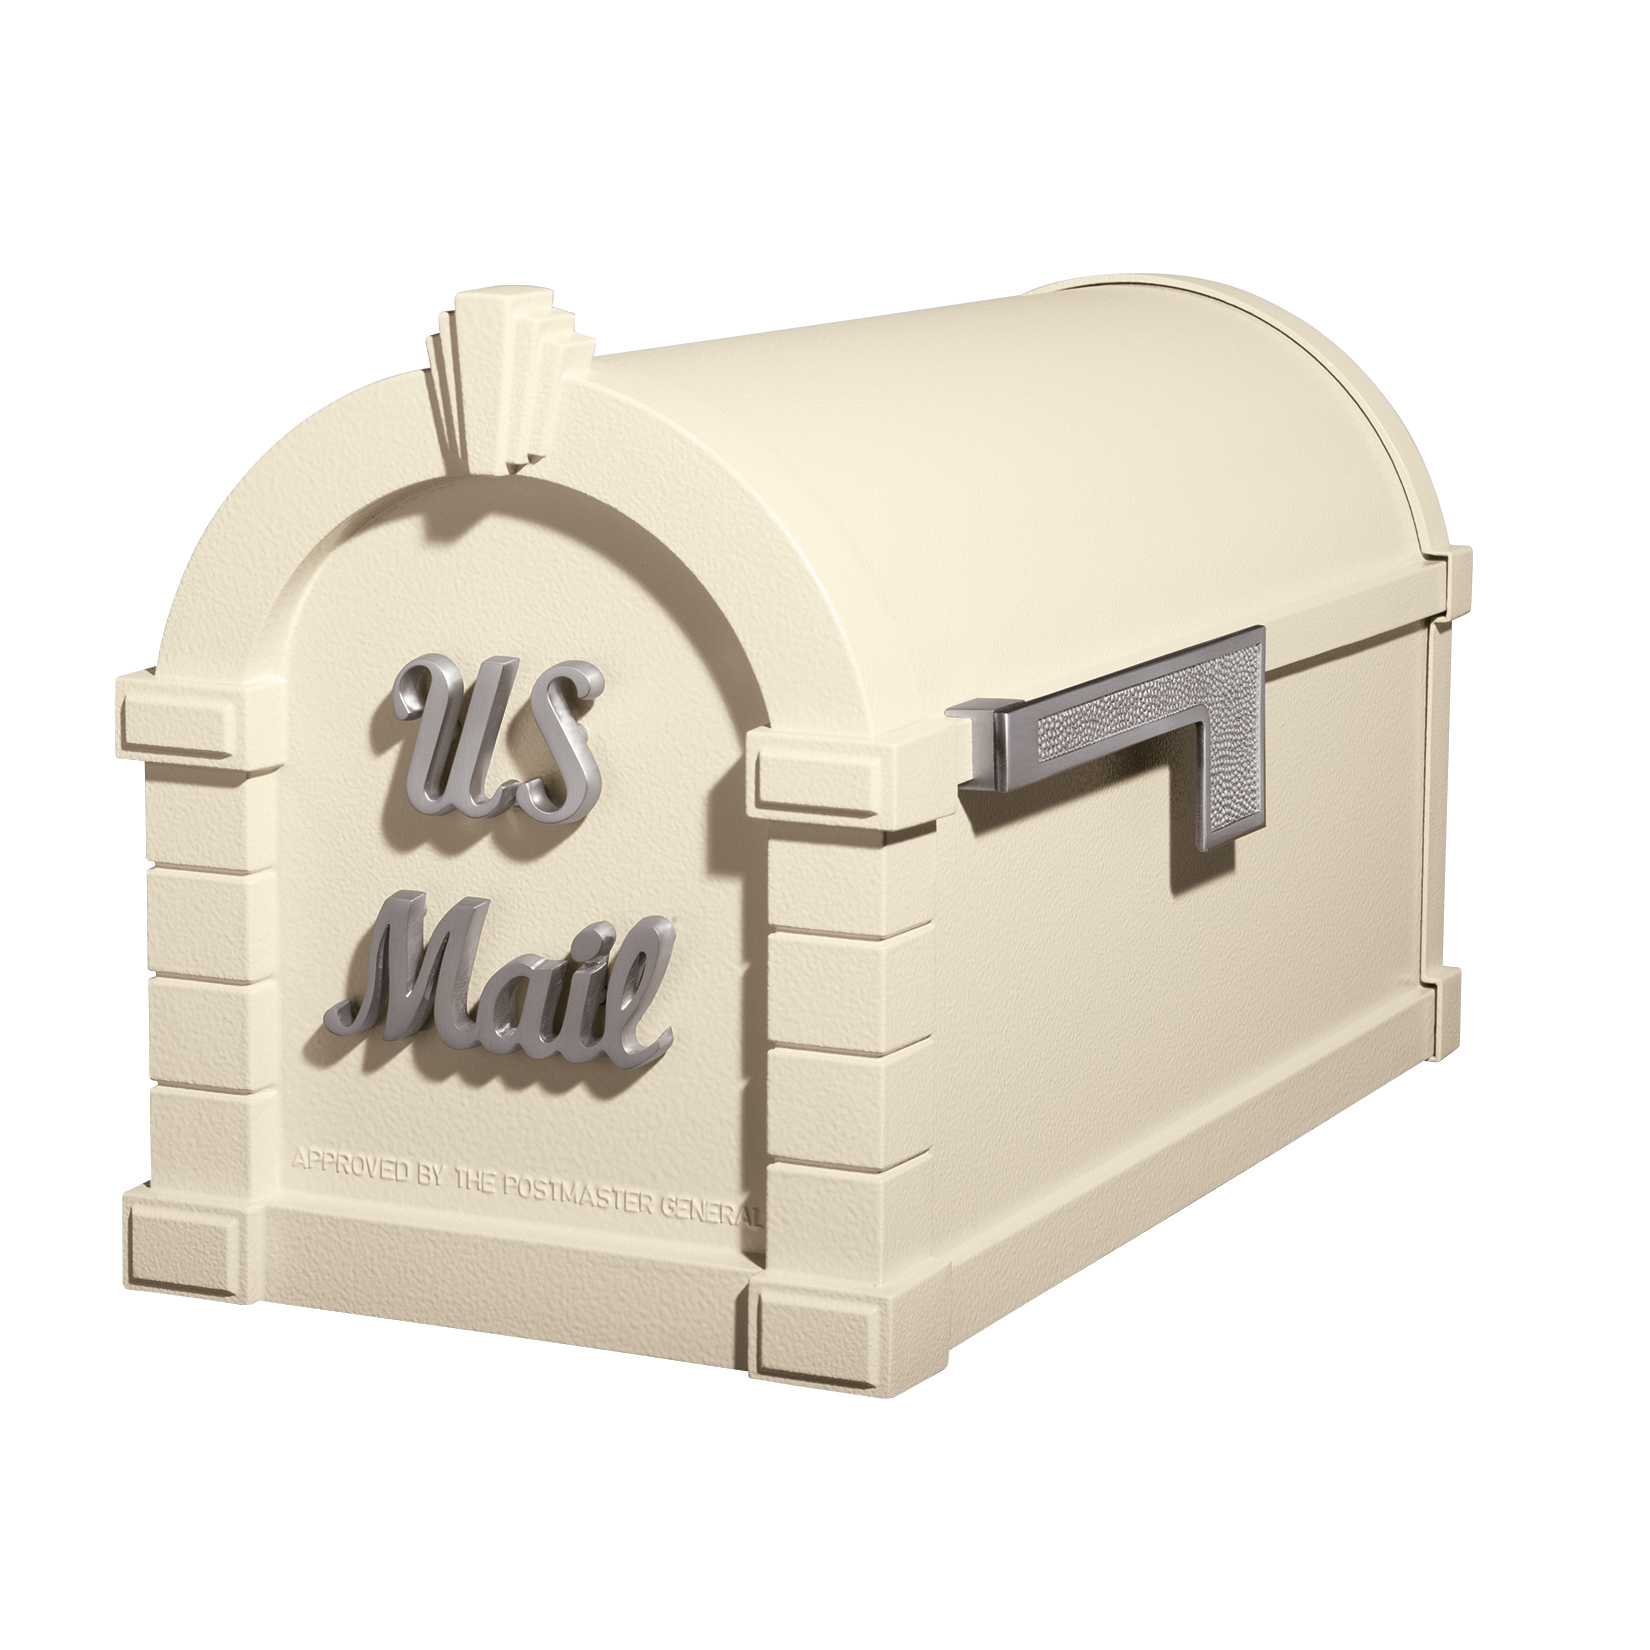 Gaines Signature Keystone Mailboxes - Almond with Satin Nickel